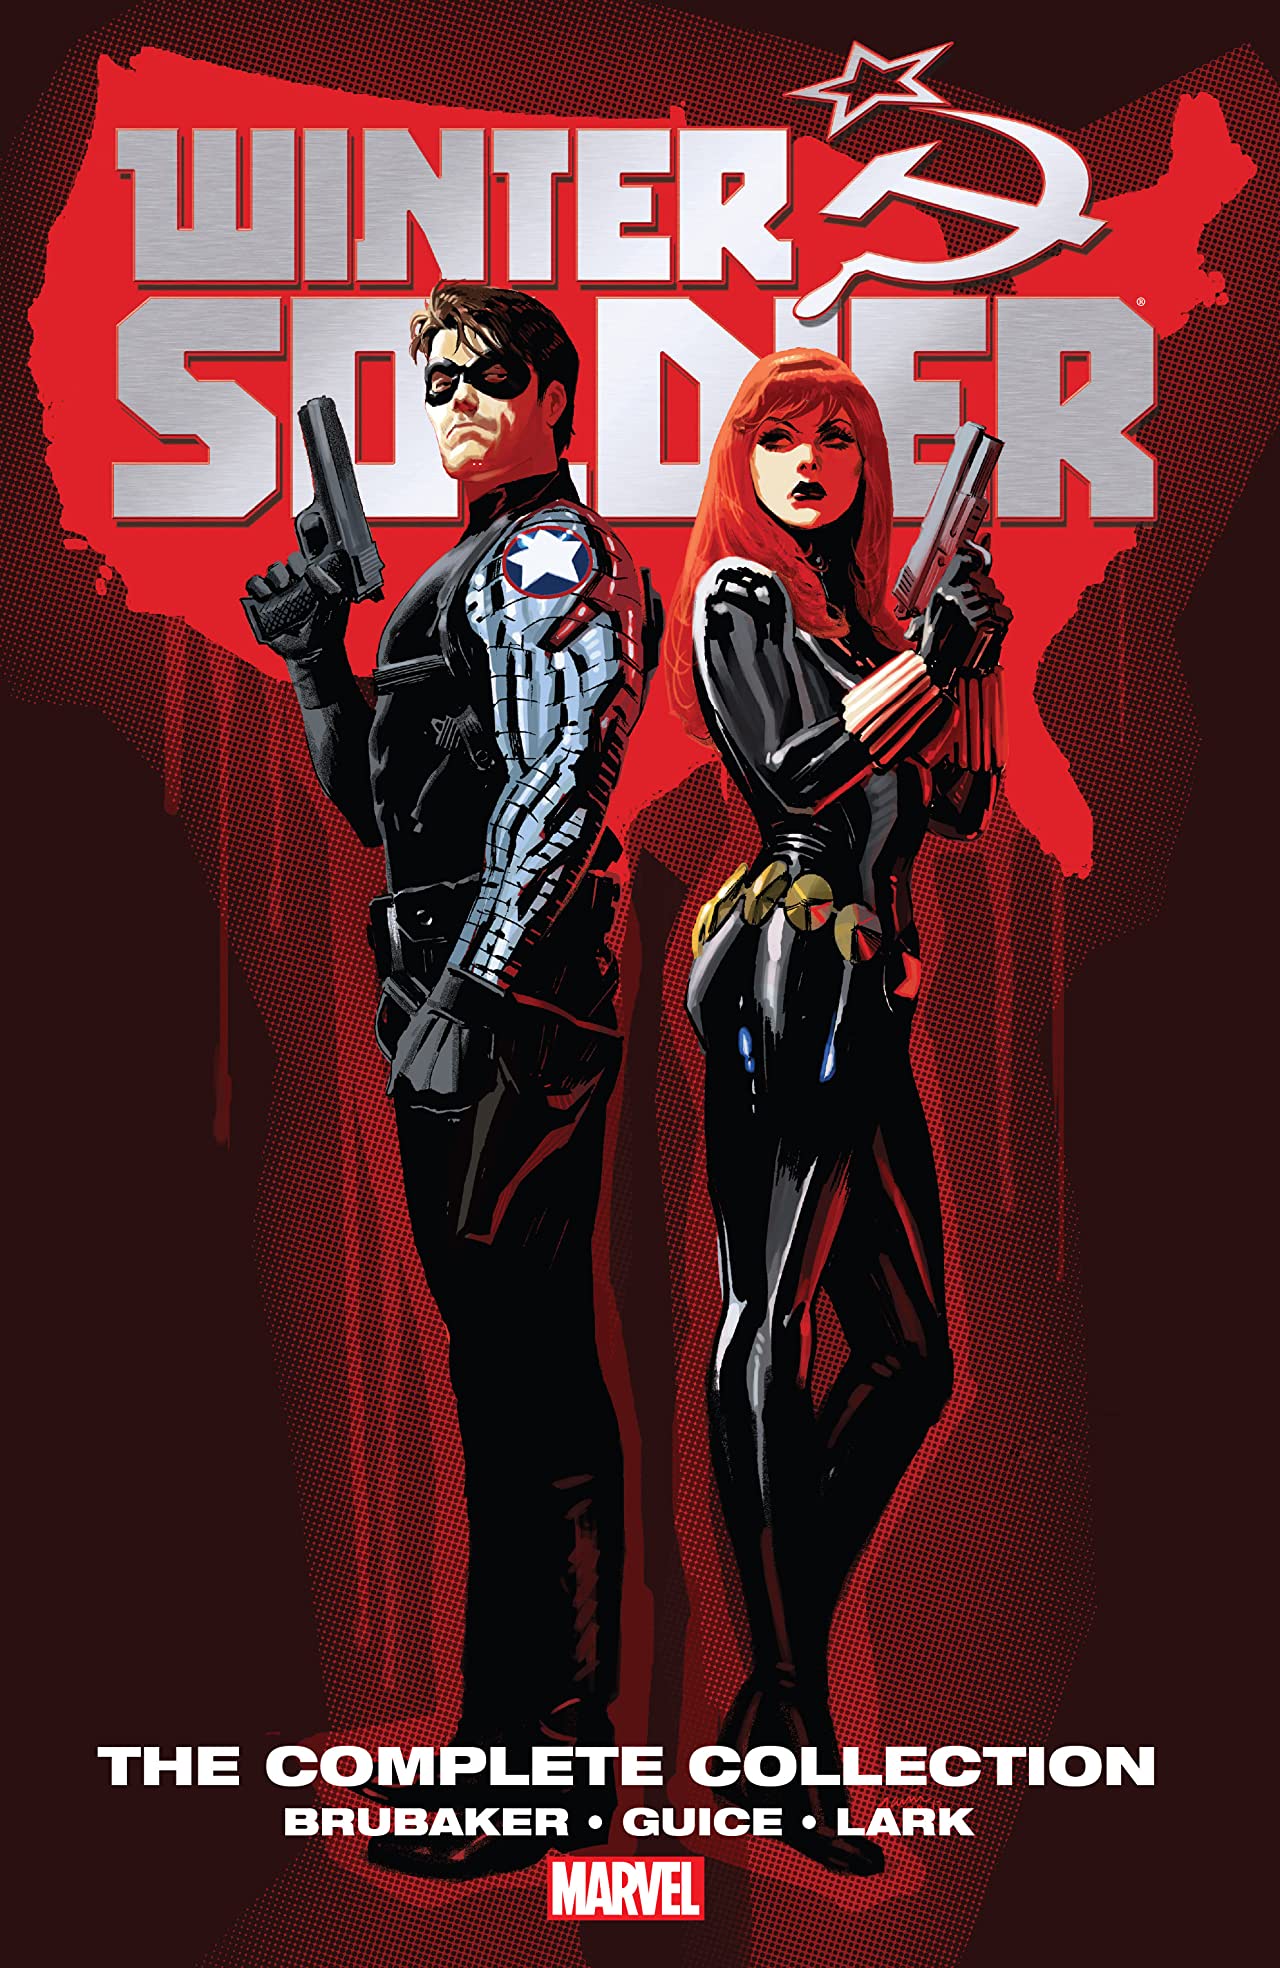 WINTER SOLDIER BY ED BRUBAKER: THE COMPLETE COLLECTION TPB (Trade Paperback)